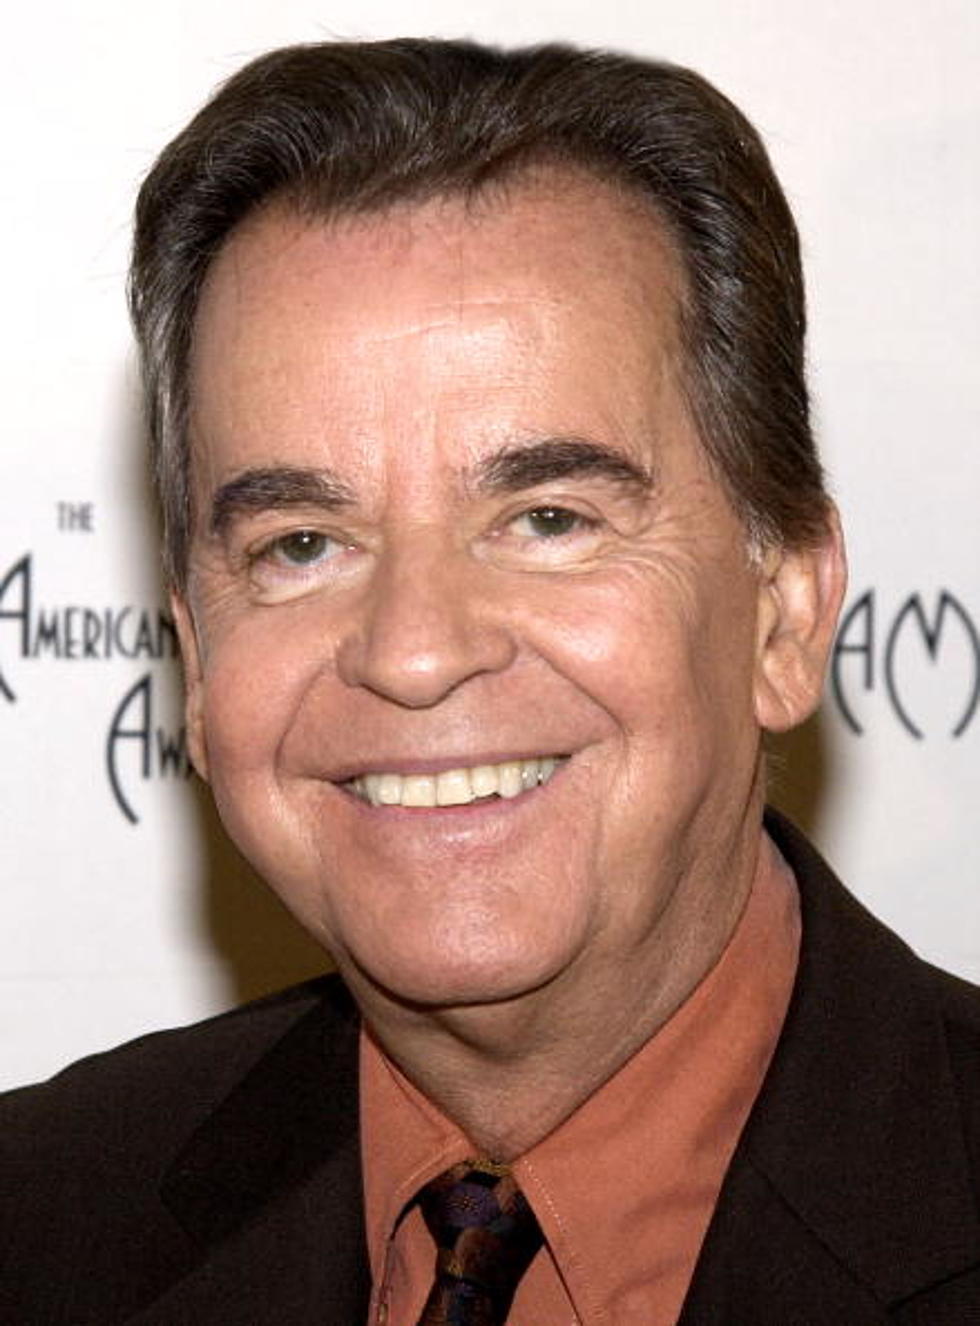 American Bandstands Dick Clark Dies at Age 82 [VIDEO]